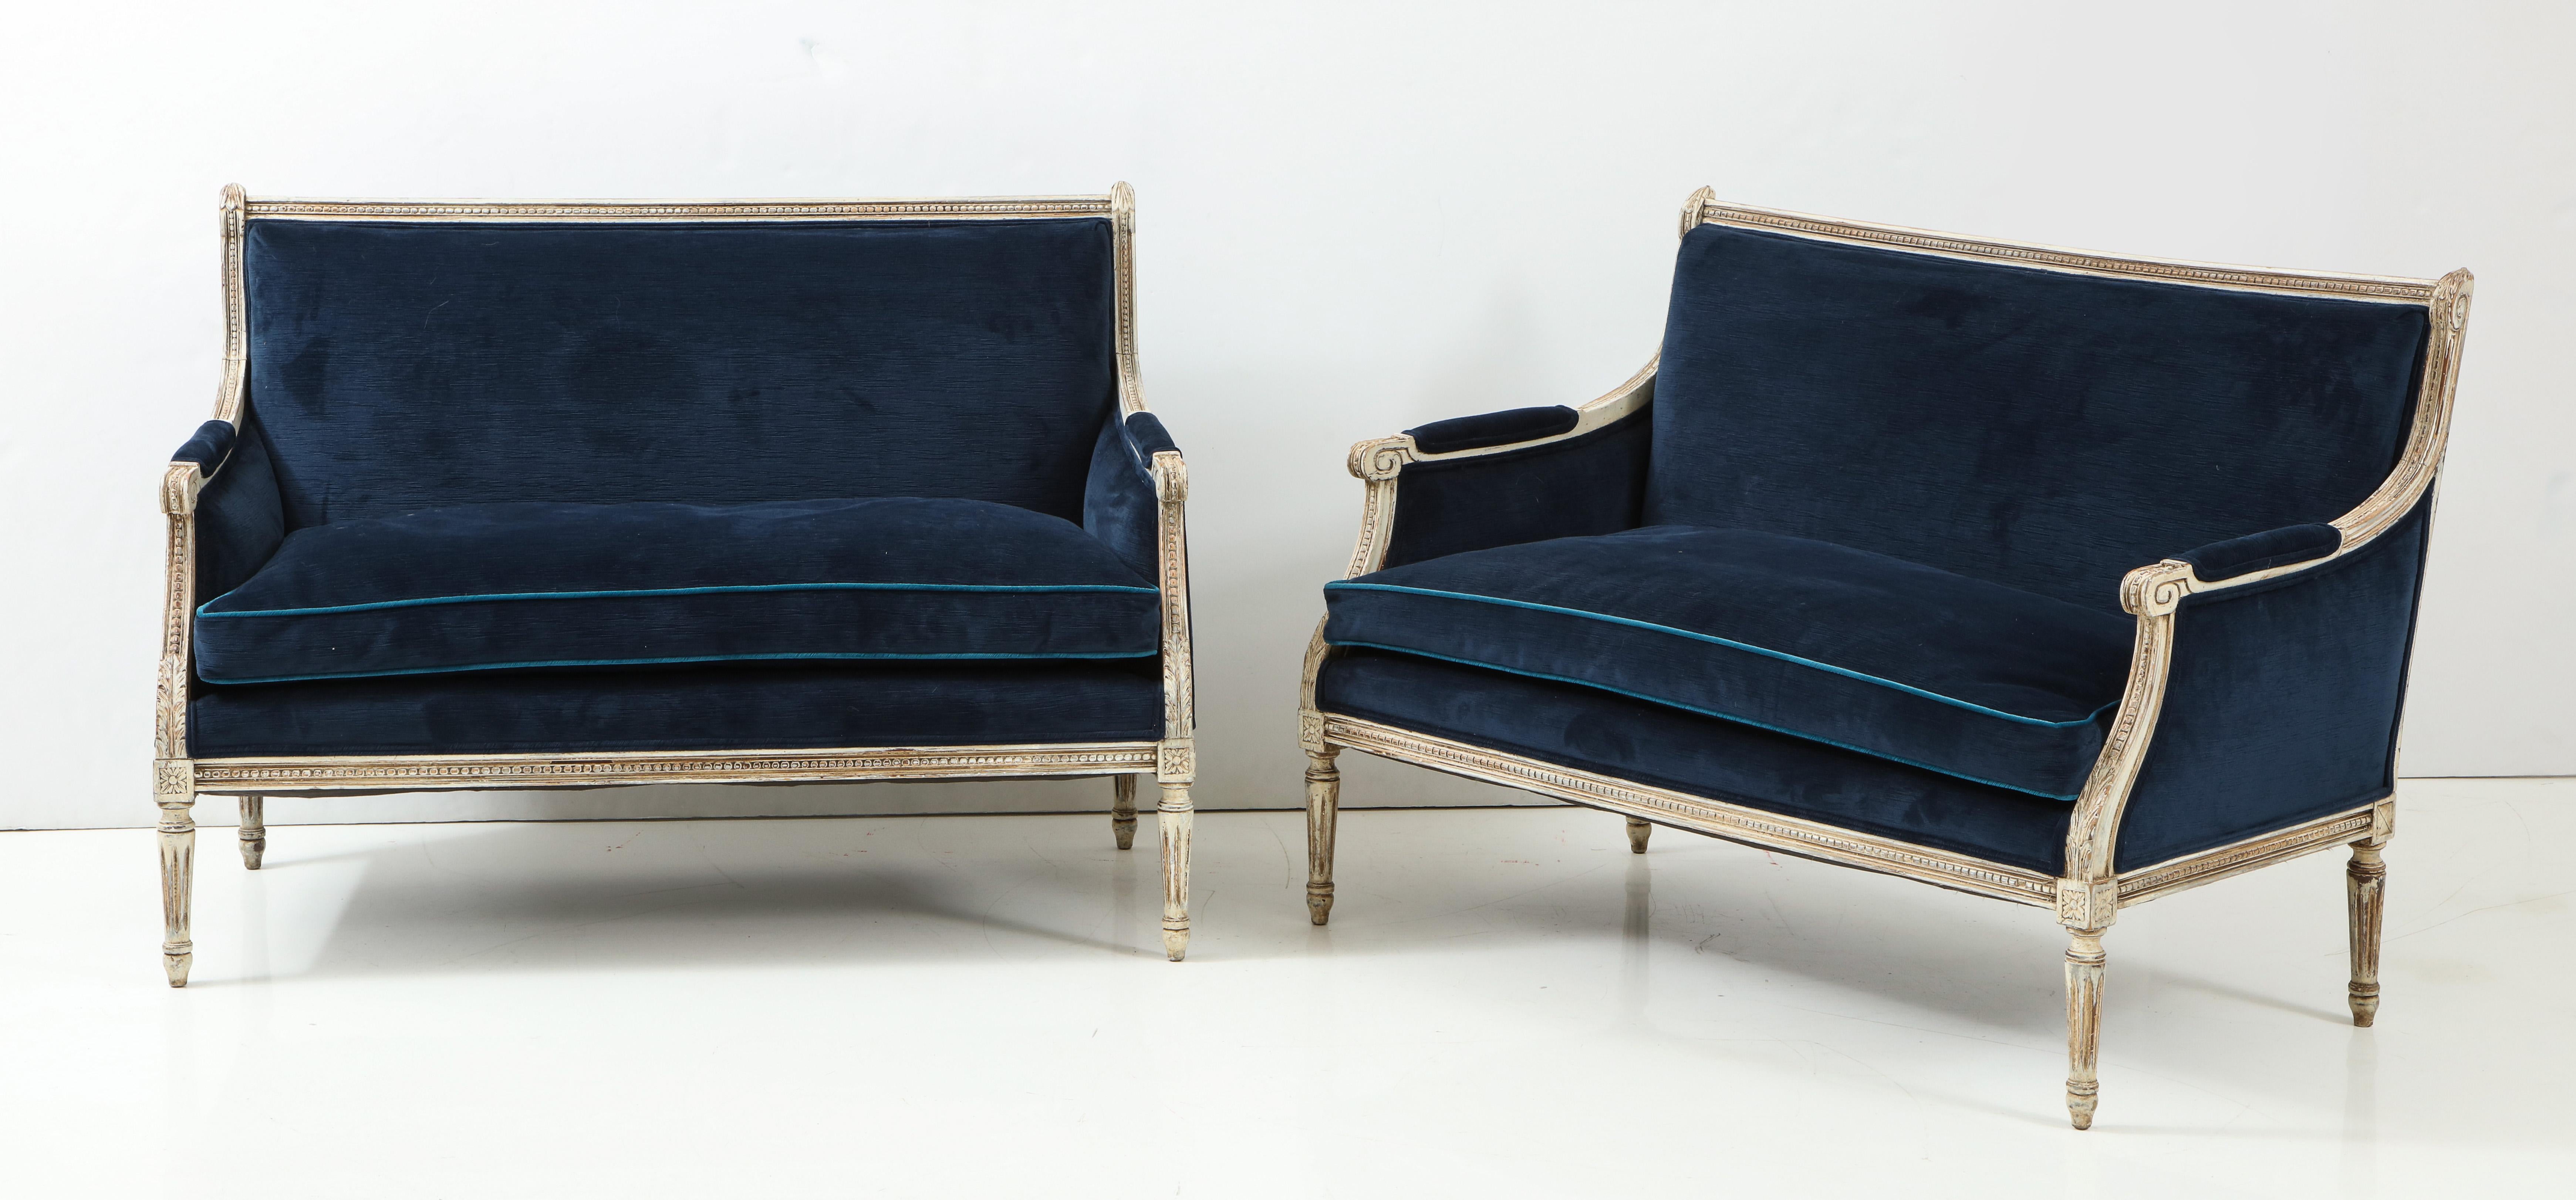 A pair of Louis XVI style painted settees covered in a rich navy velvet. The frames have beautiful carved detail, characteristic of the Louis XVI style. The finish is aged to a soft whitish-grey. The clean, Classic lines of these pieces make them